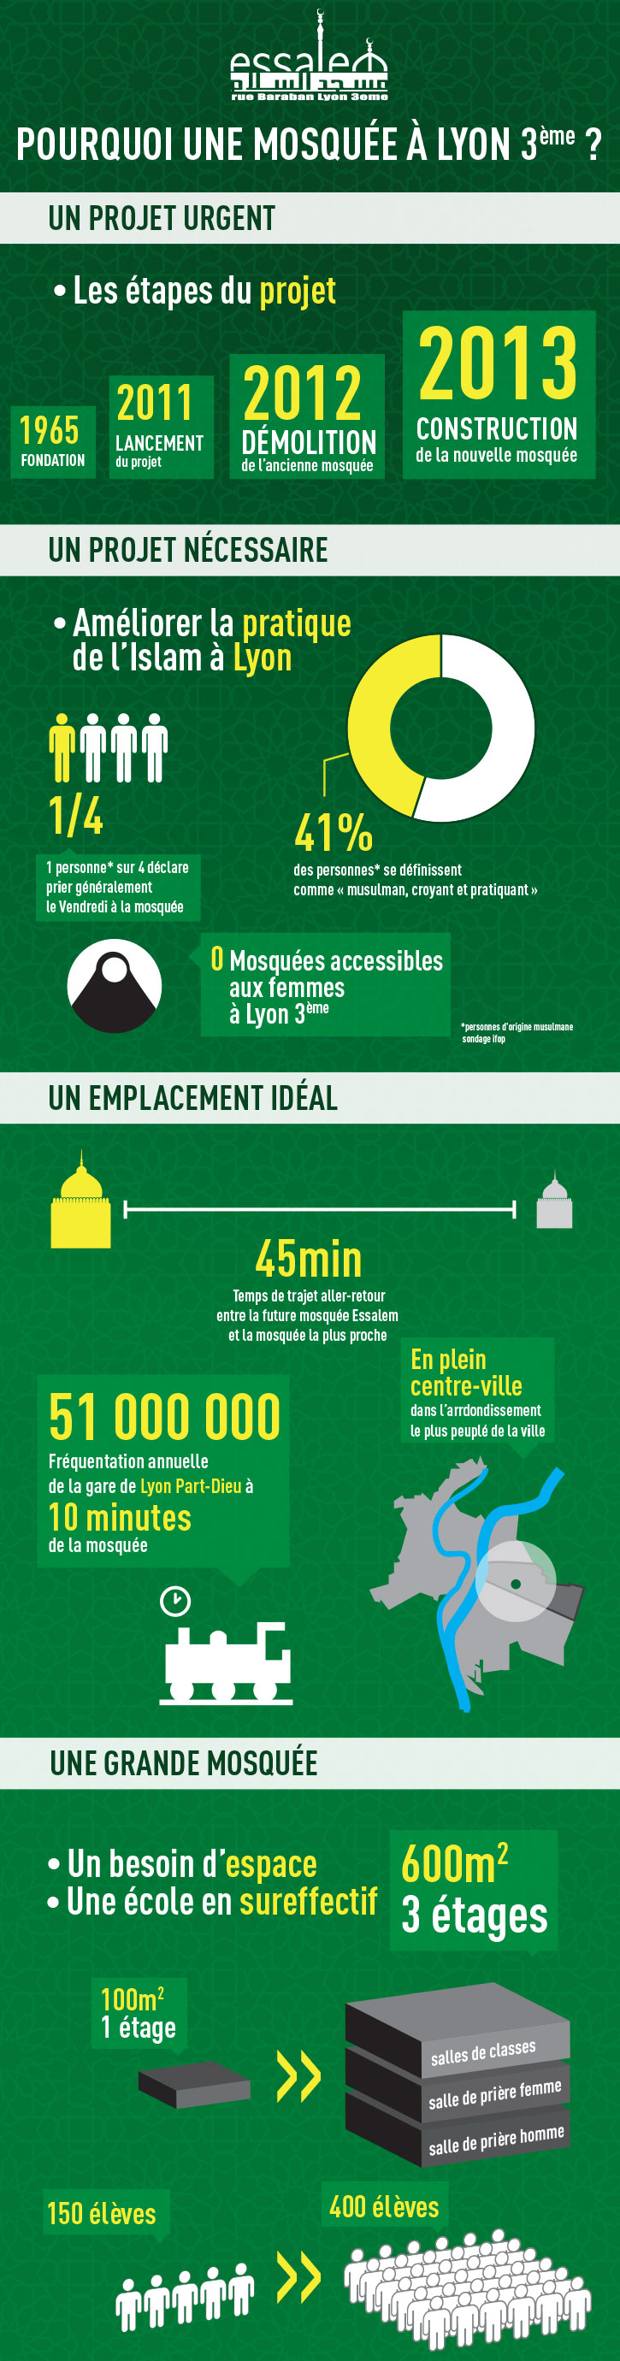 infographie-mosquee-lyon